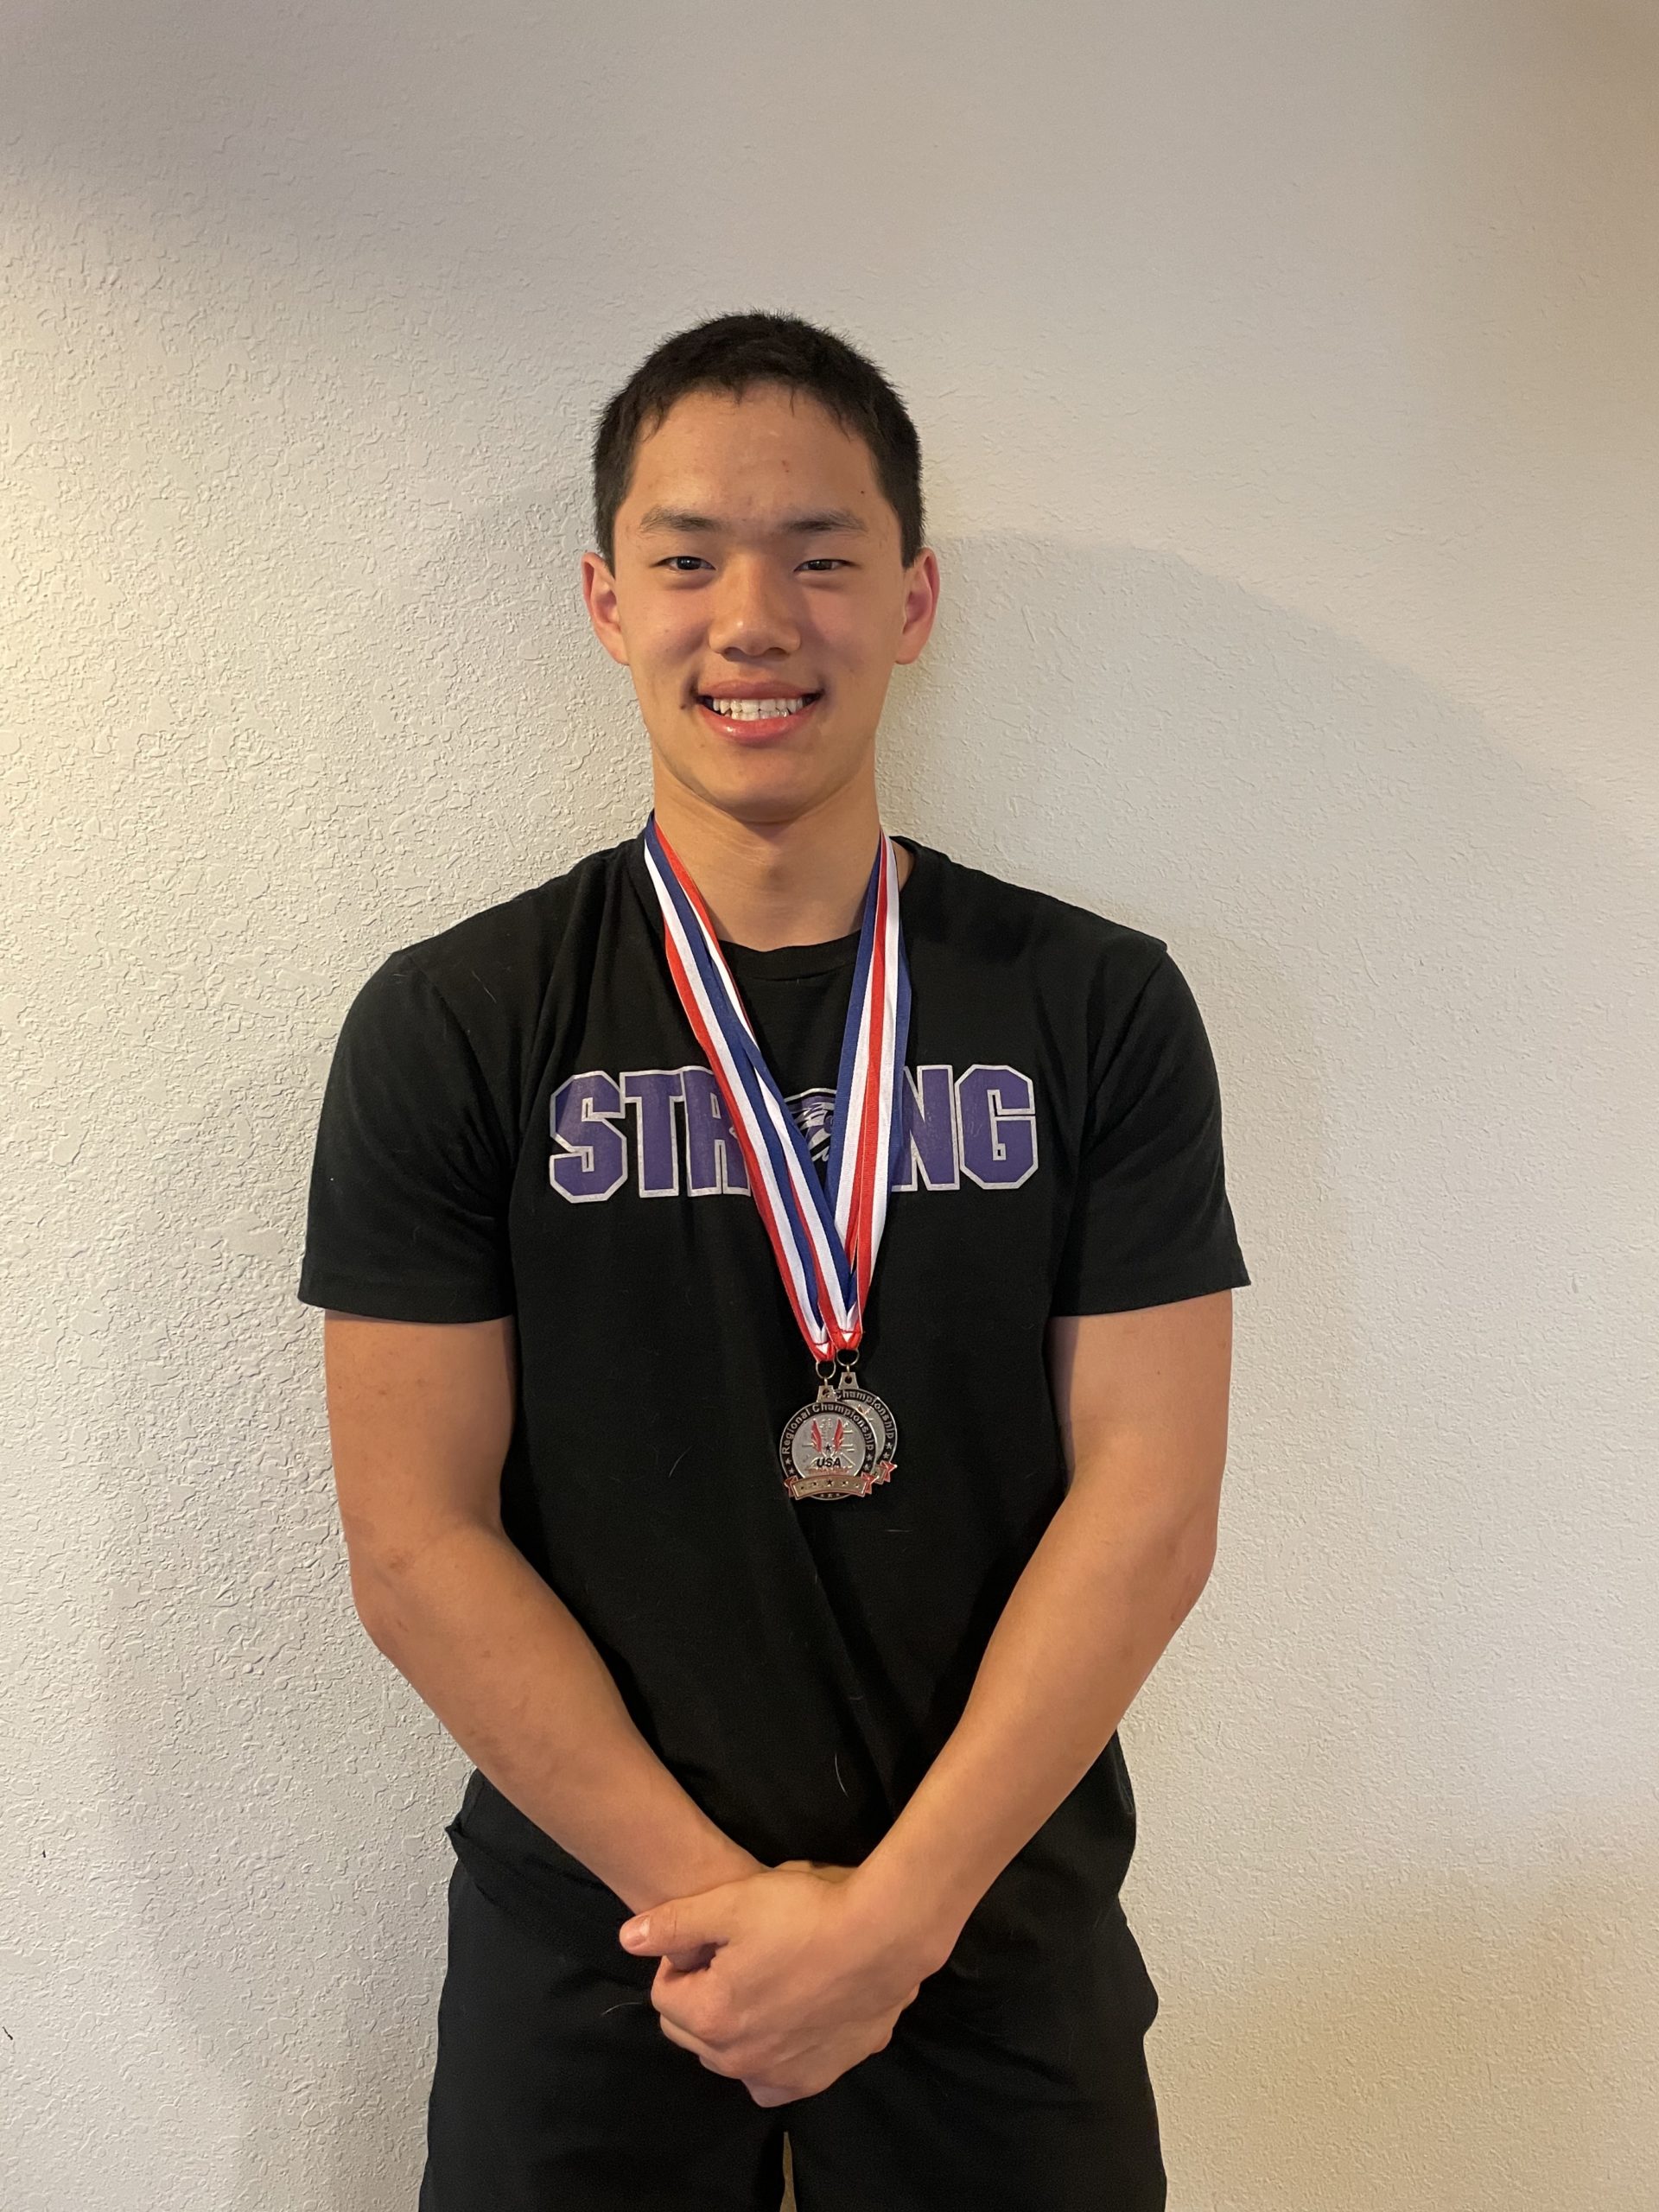 Male wearing a black shirt and two medals smiling at the camera